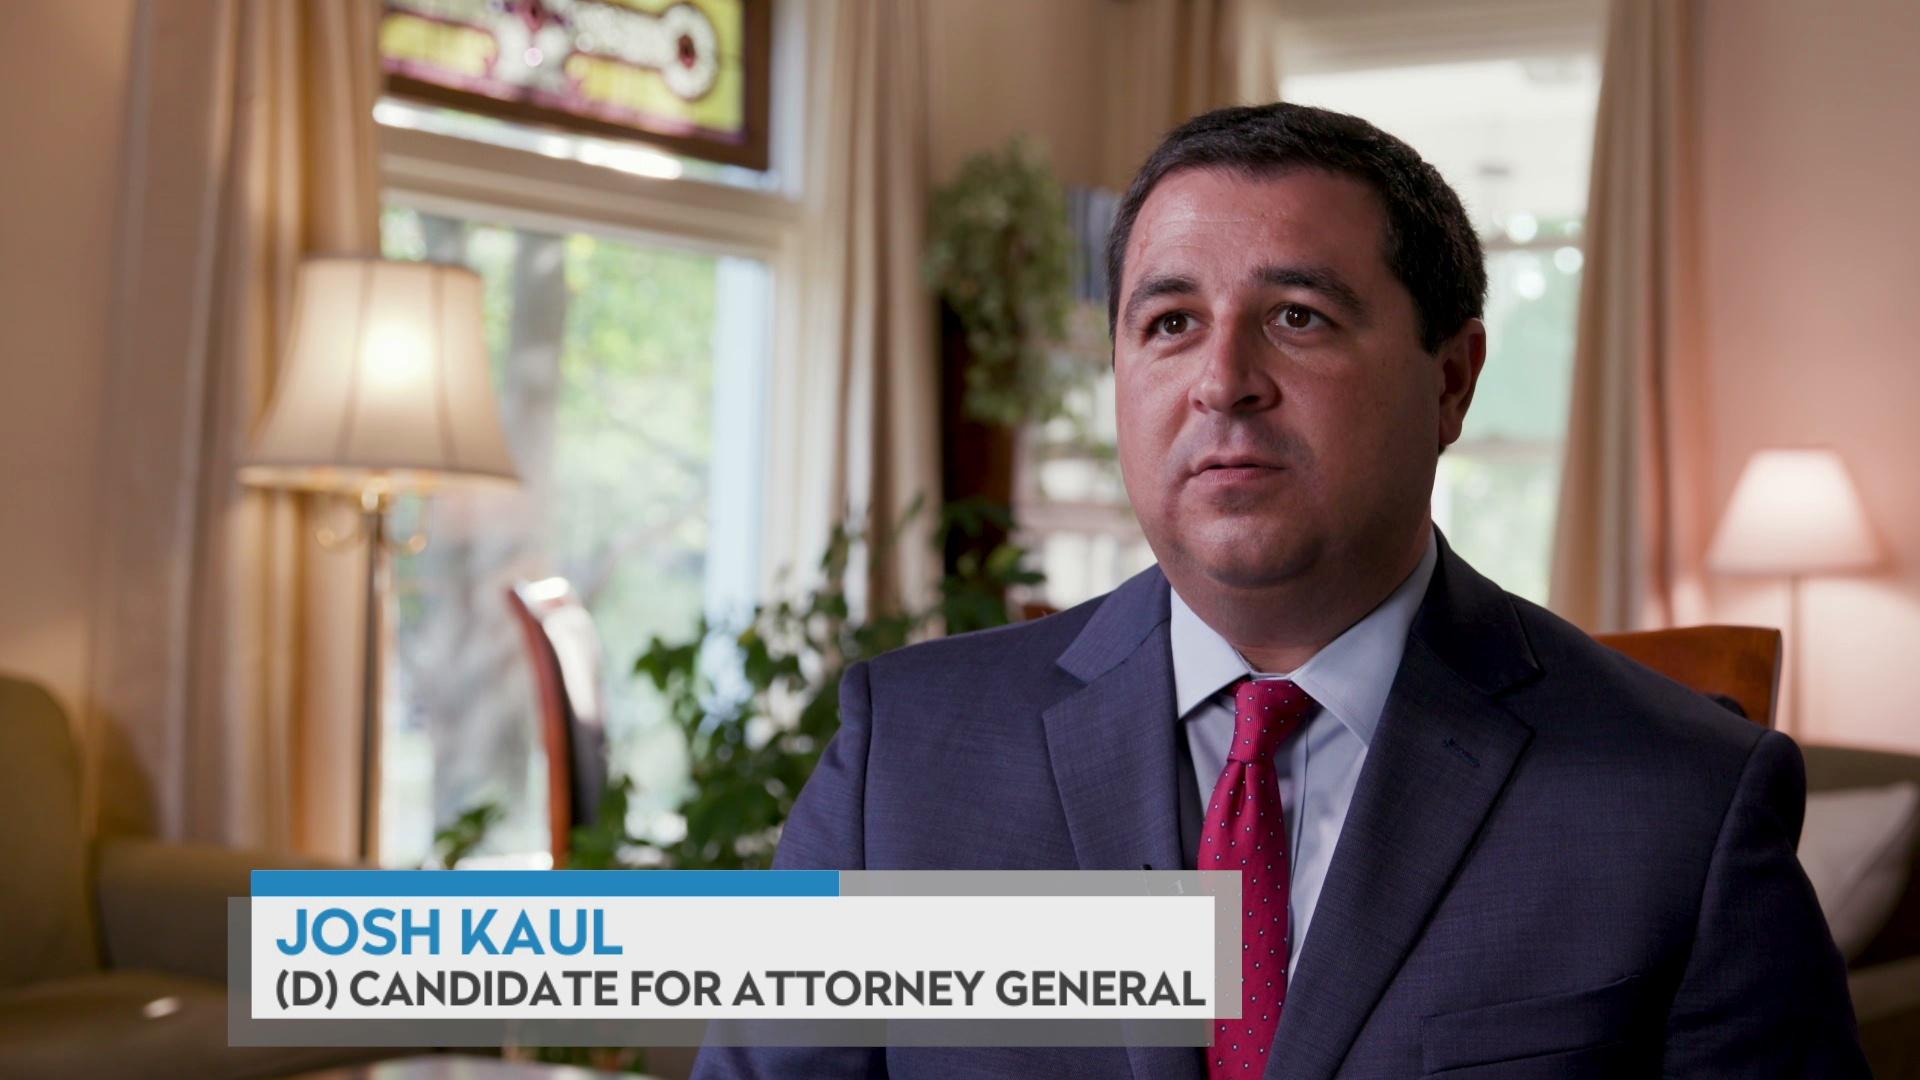 Josh Kaul on public safety and the attorney general office